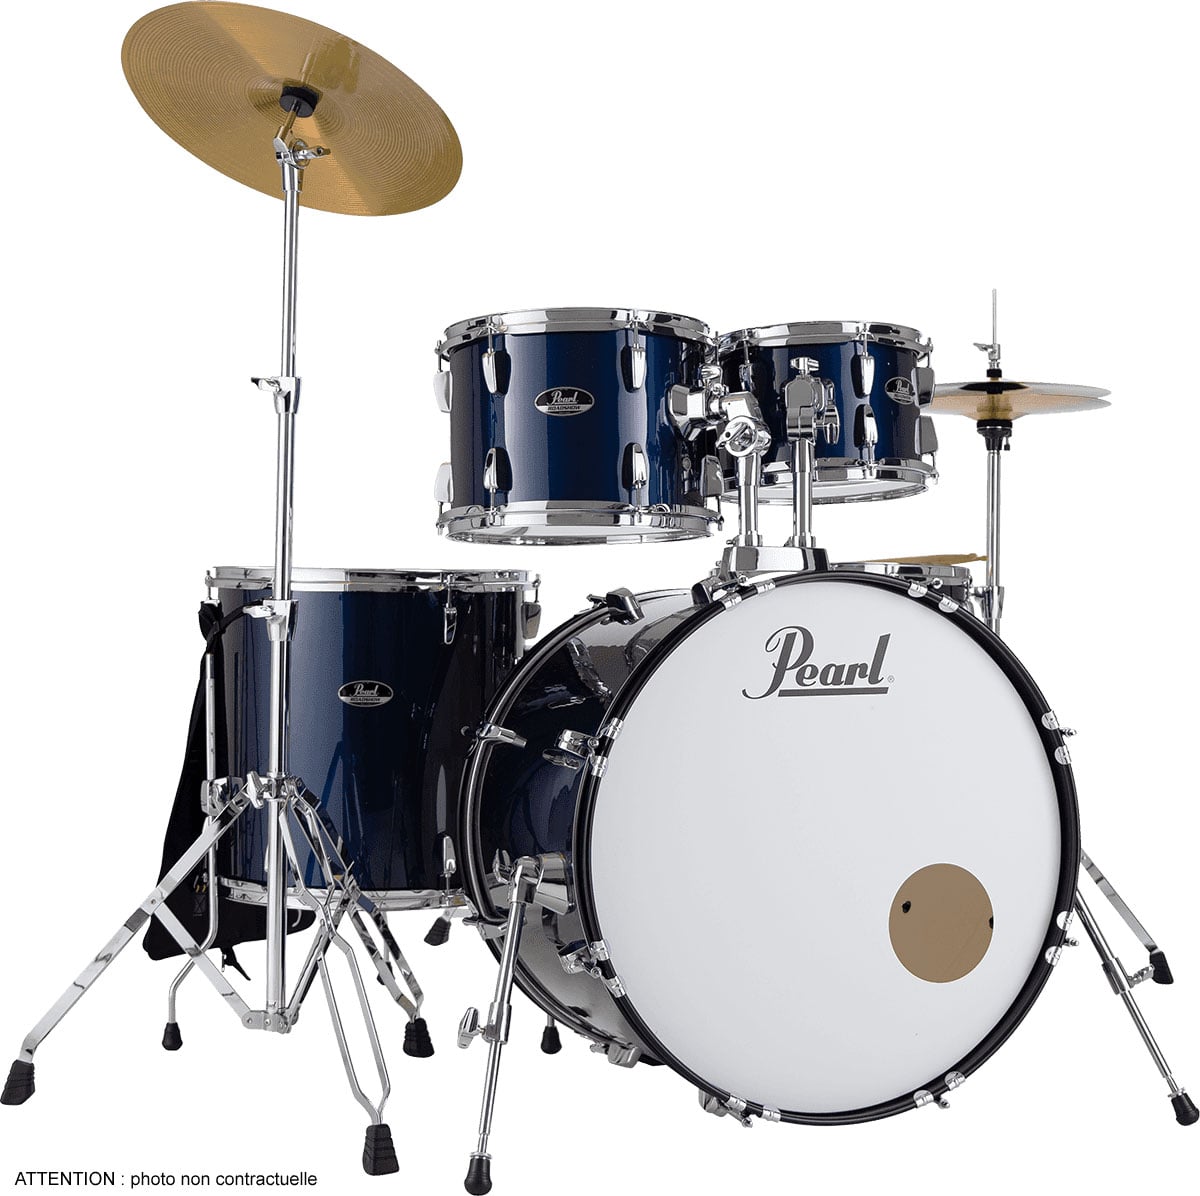 PEARL DRUMS ROADSHOW STAGE 22 ROYAL BLUE METALLIC + SOLAR CYMBALS